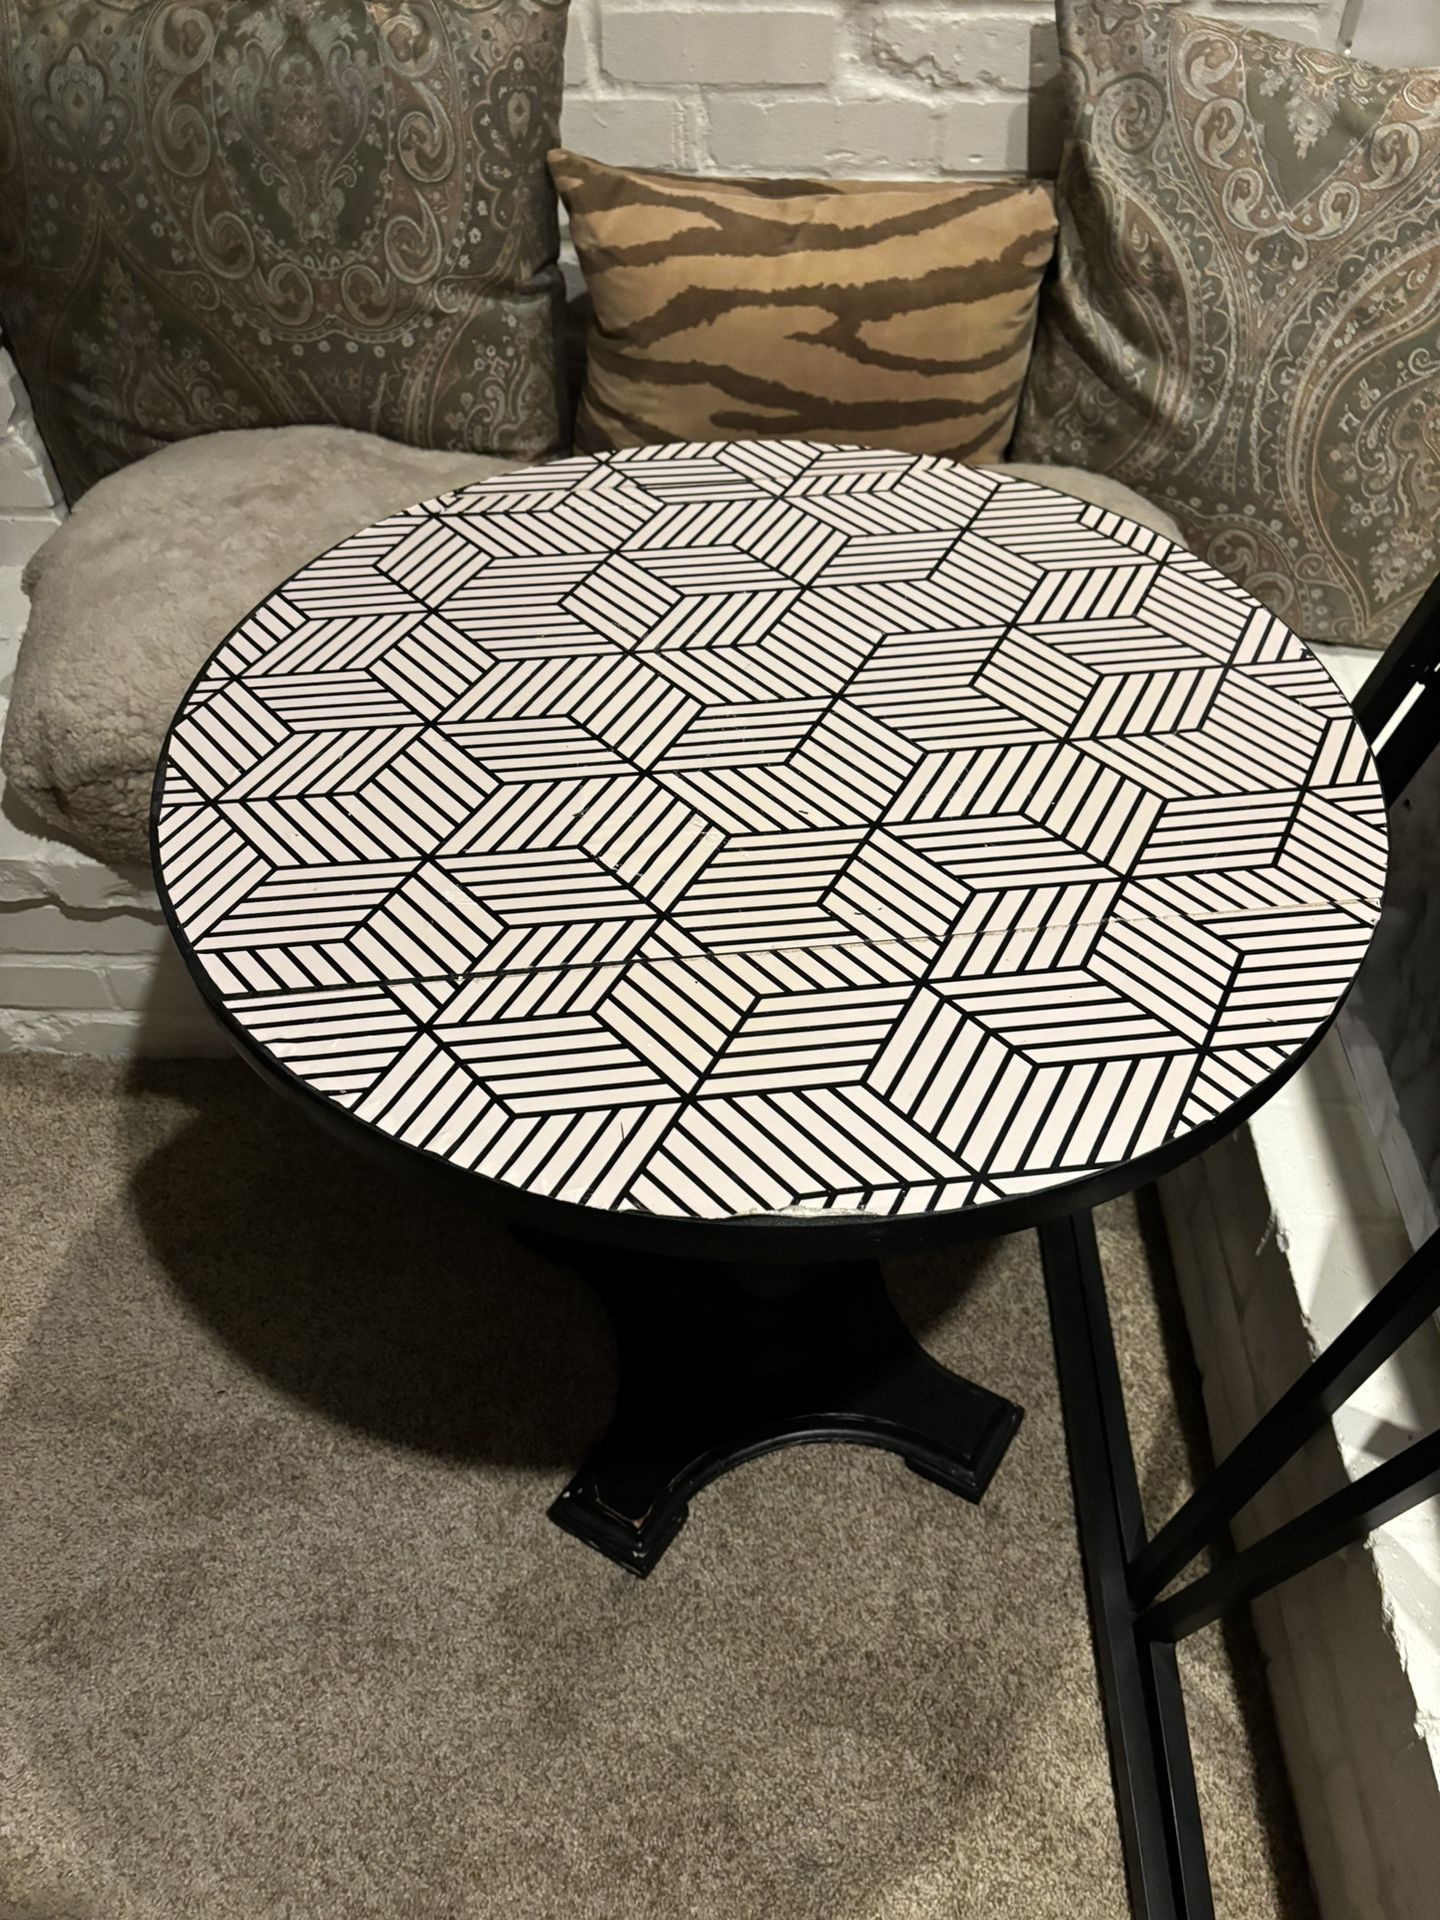 Cute Black Side Table With Patterned Contact Paper